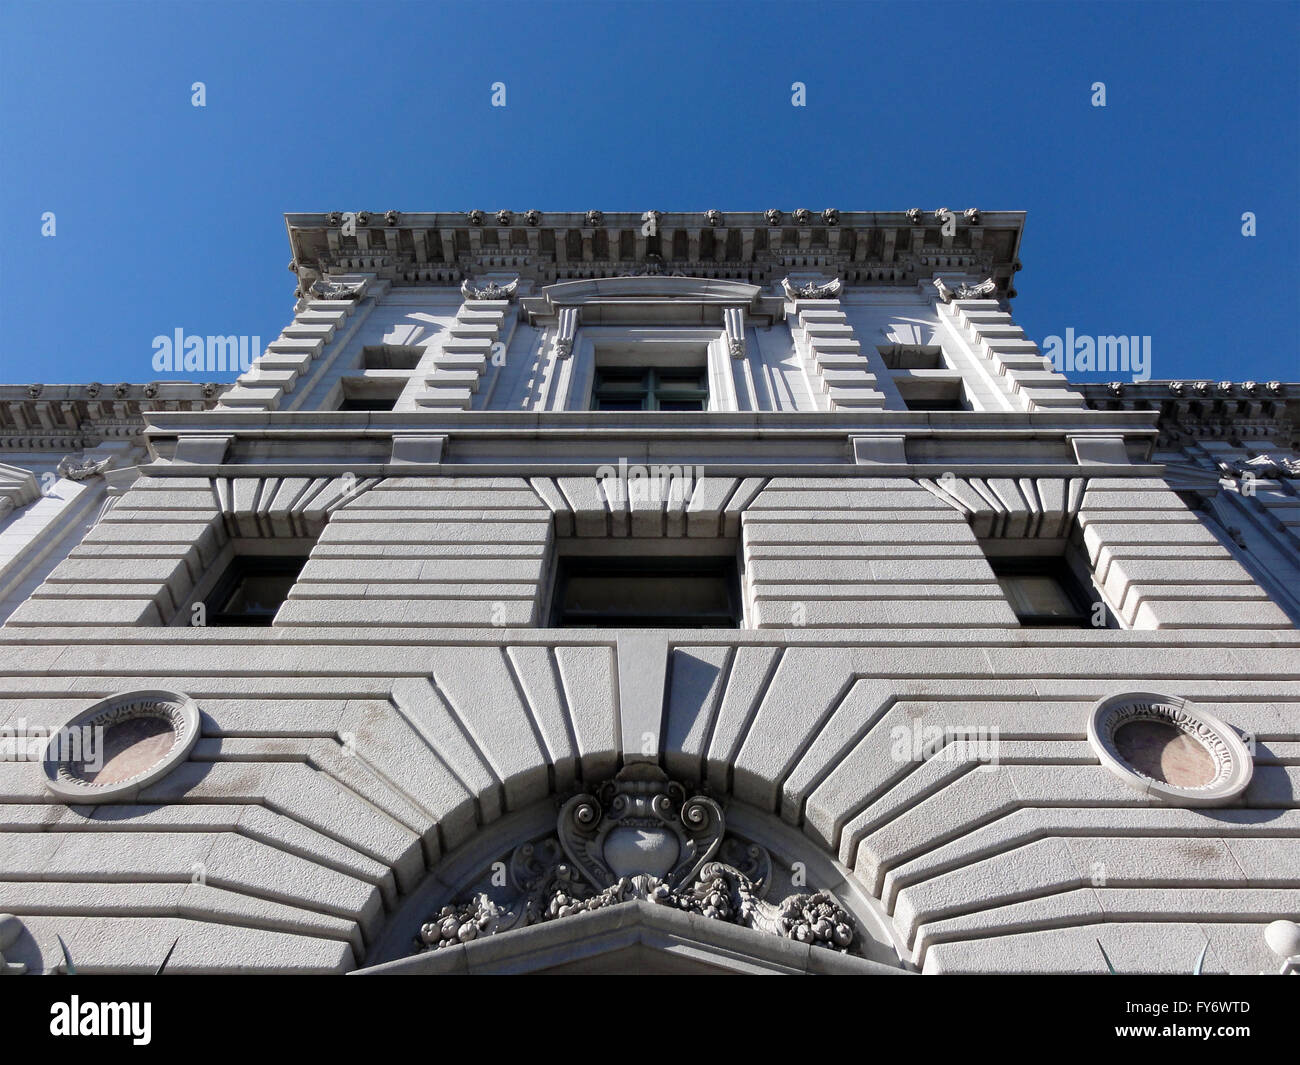 Looking up at the United States Court of Appeals, Ninth Circuit.  Headquartered in San Francisco, California, the Ninth Circuit Stock Photo